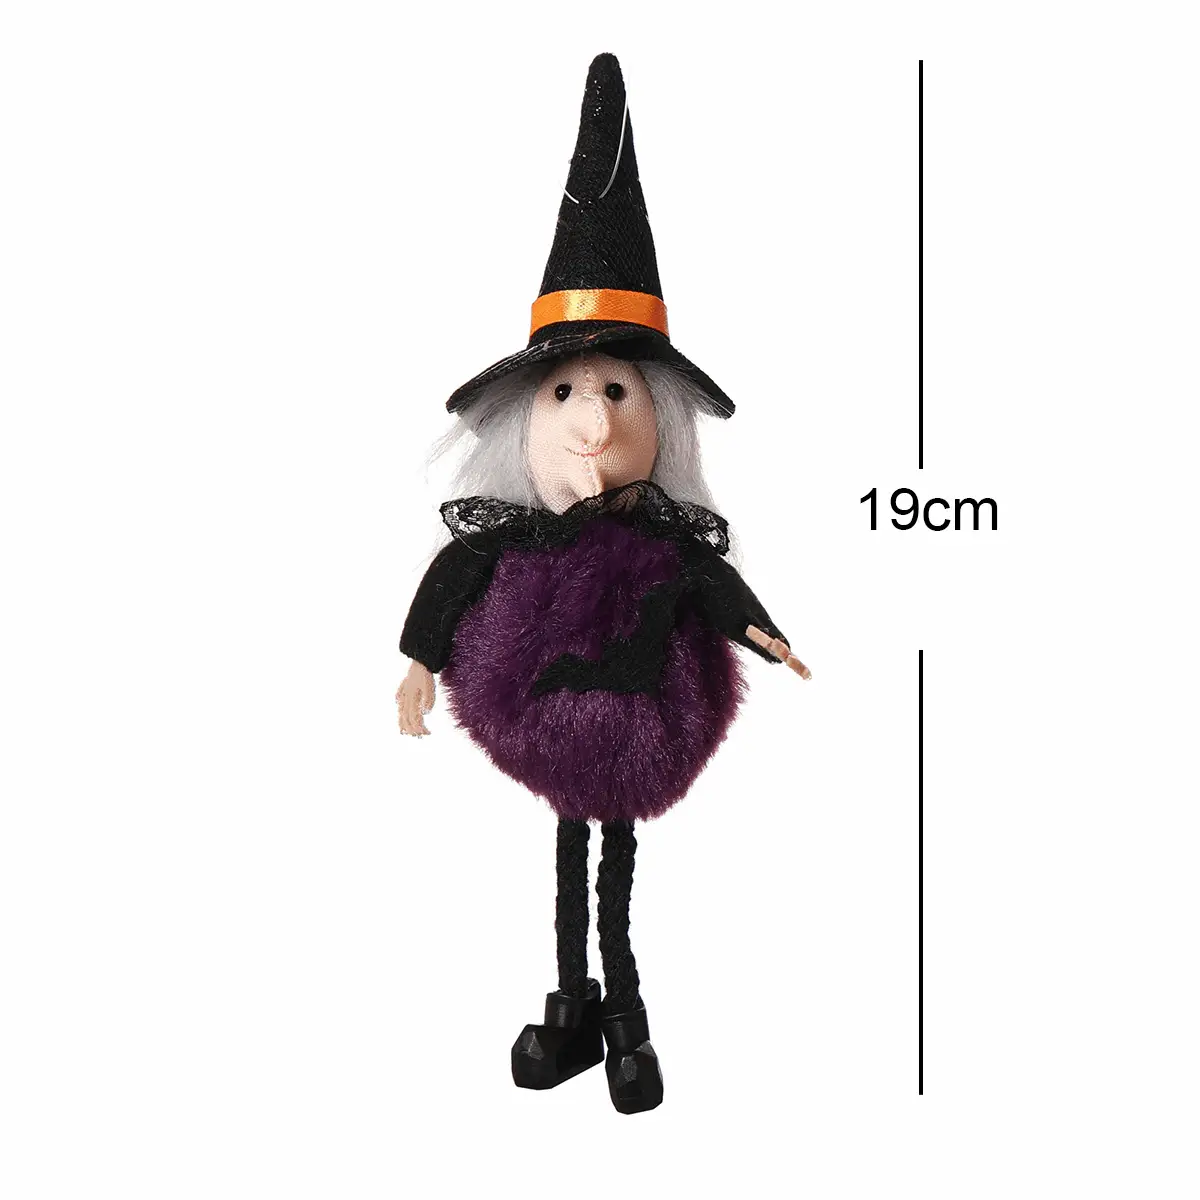 a stuffed doll wearing a witches costume